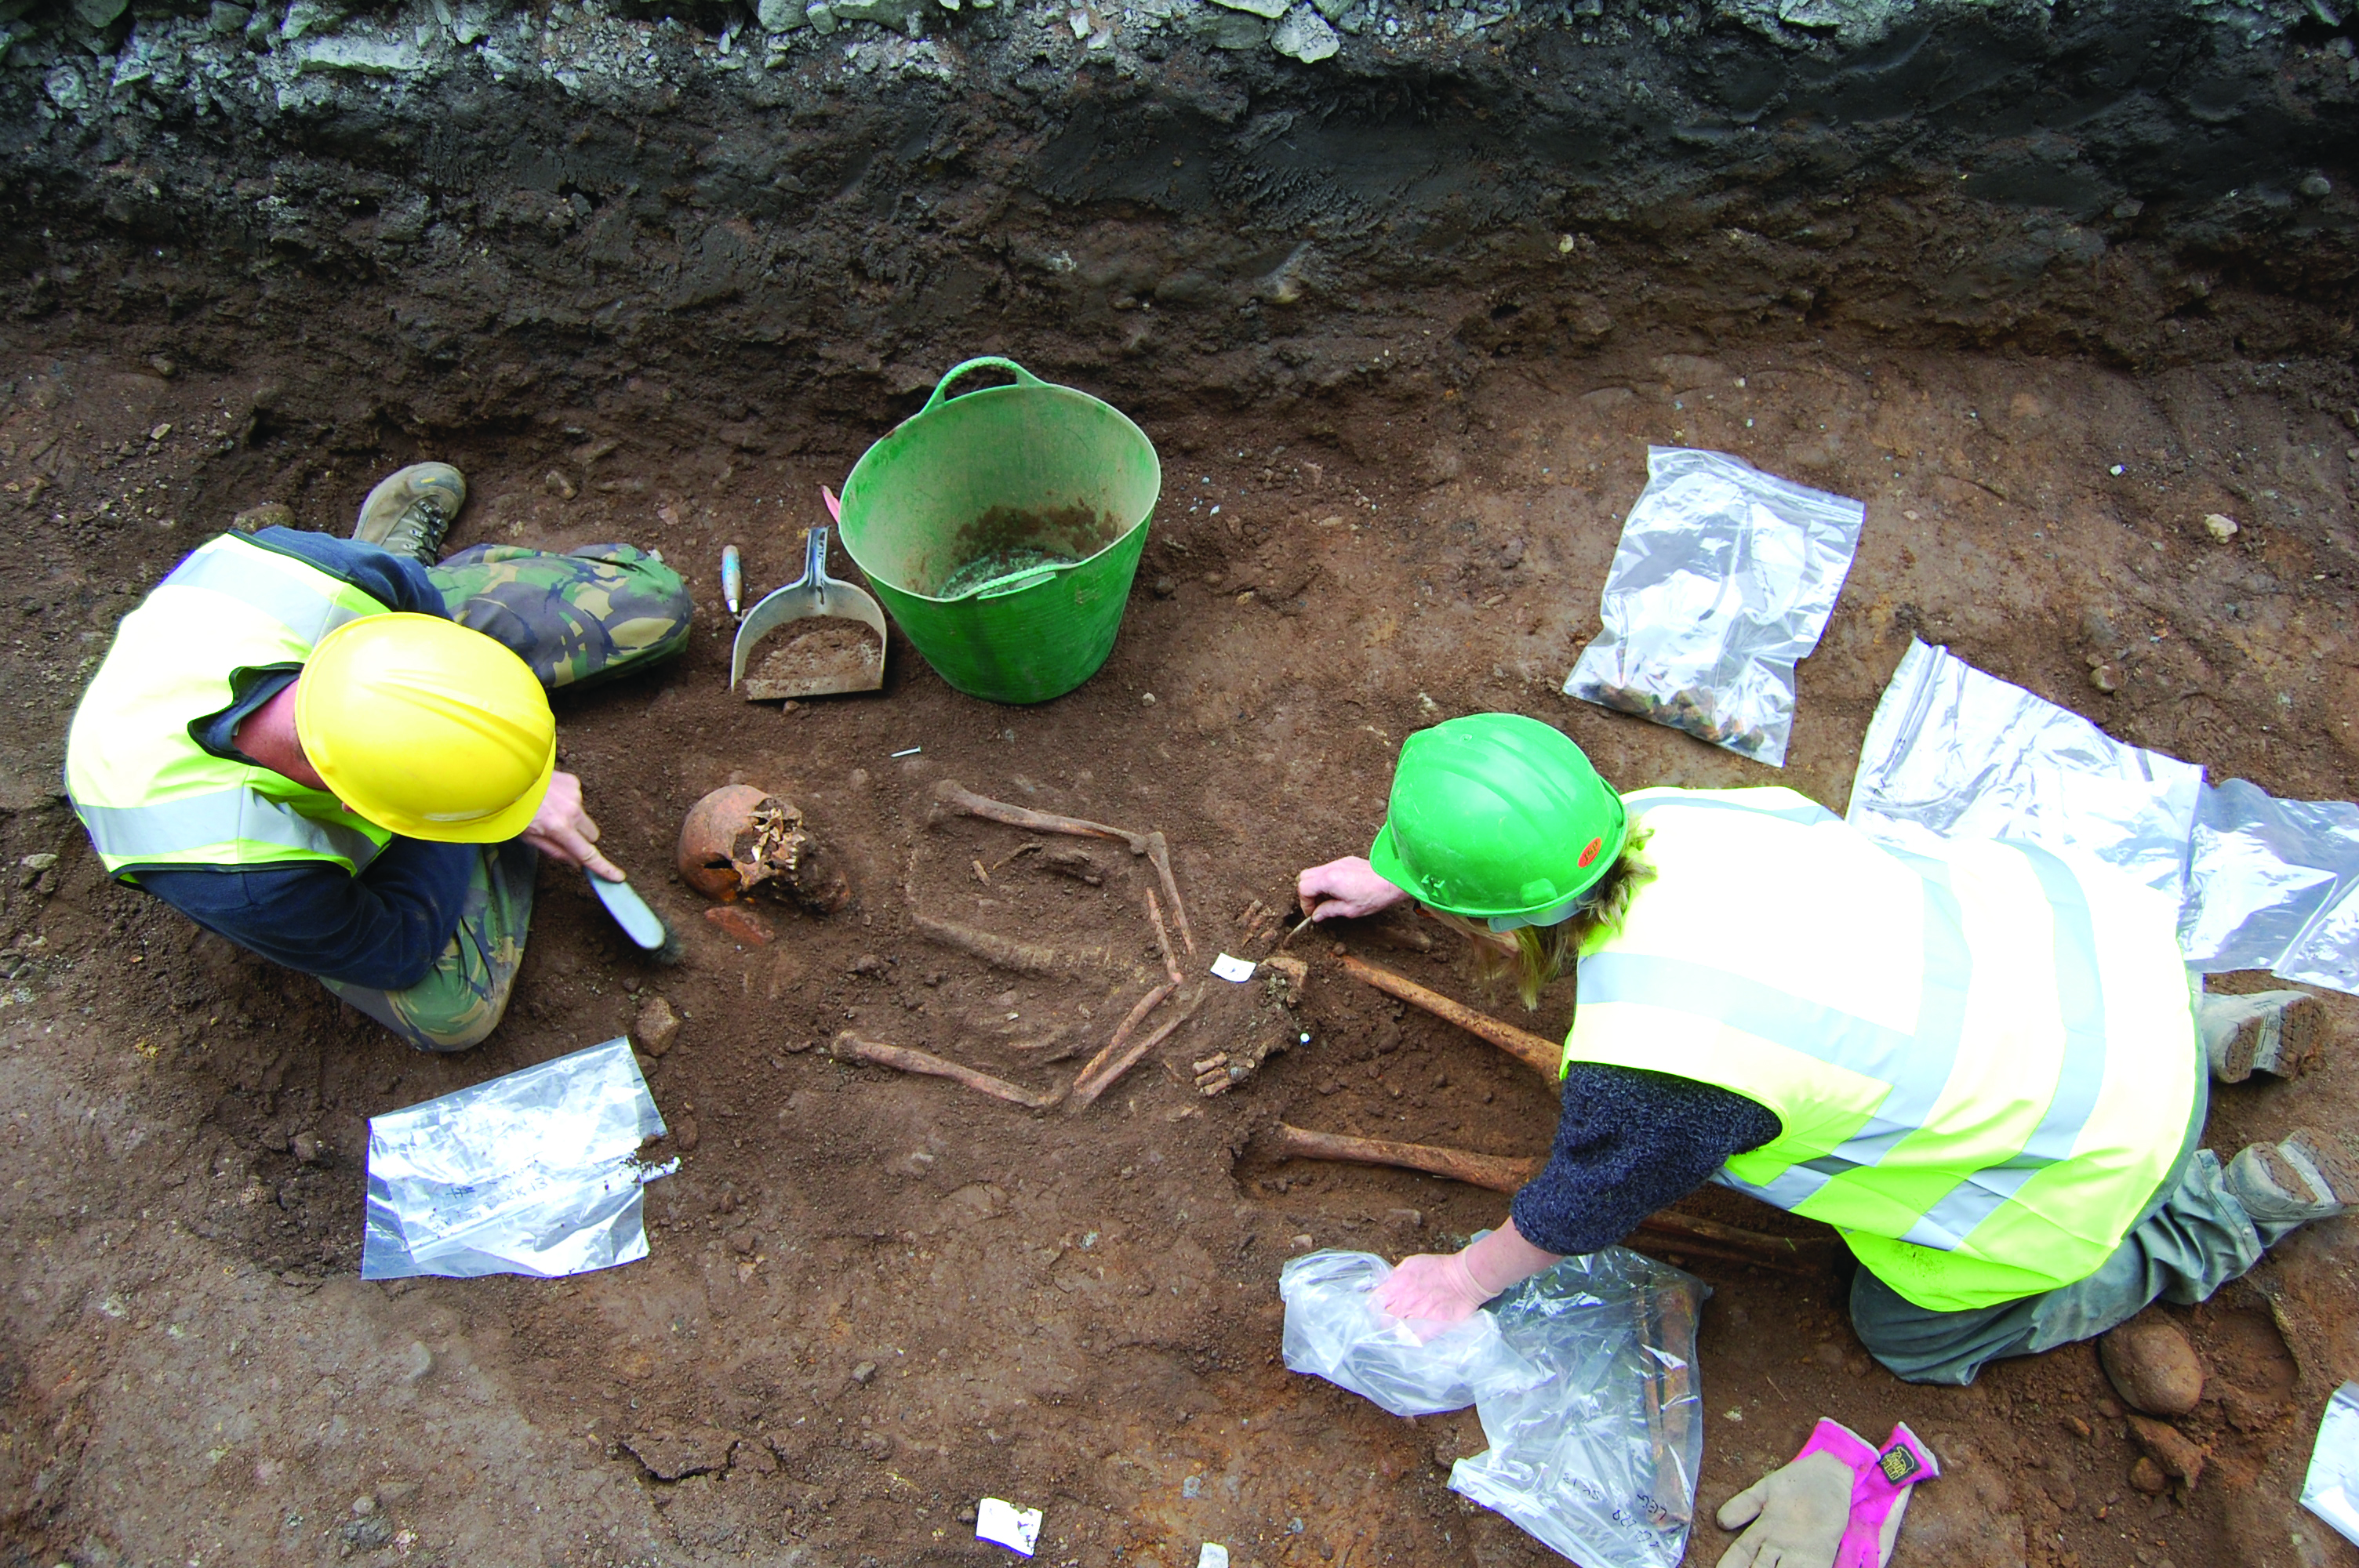 Recording and lifting one of the burials